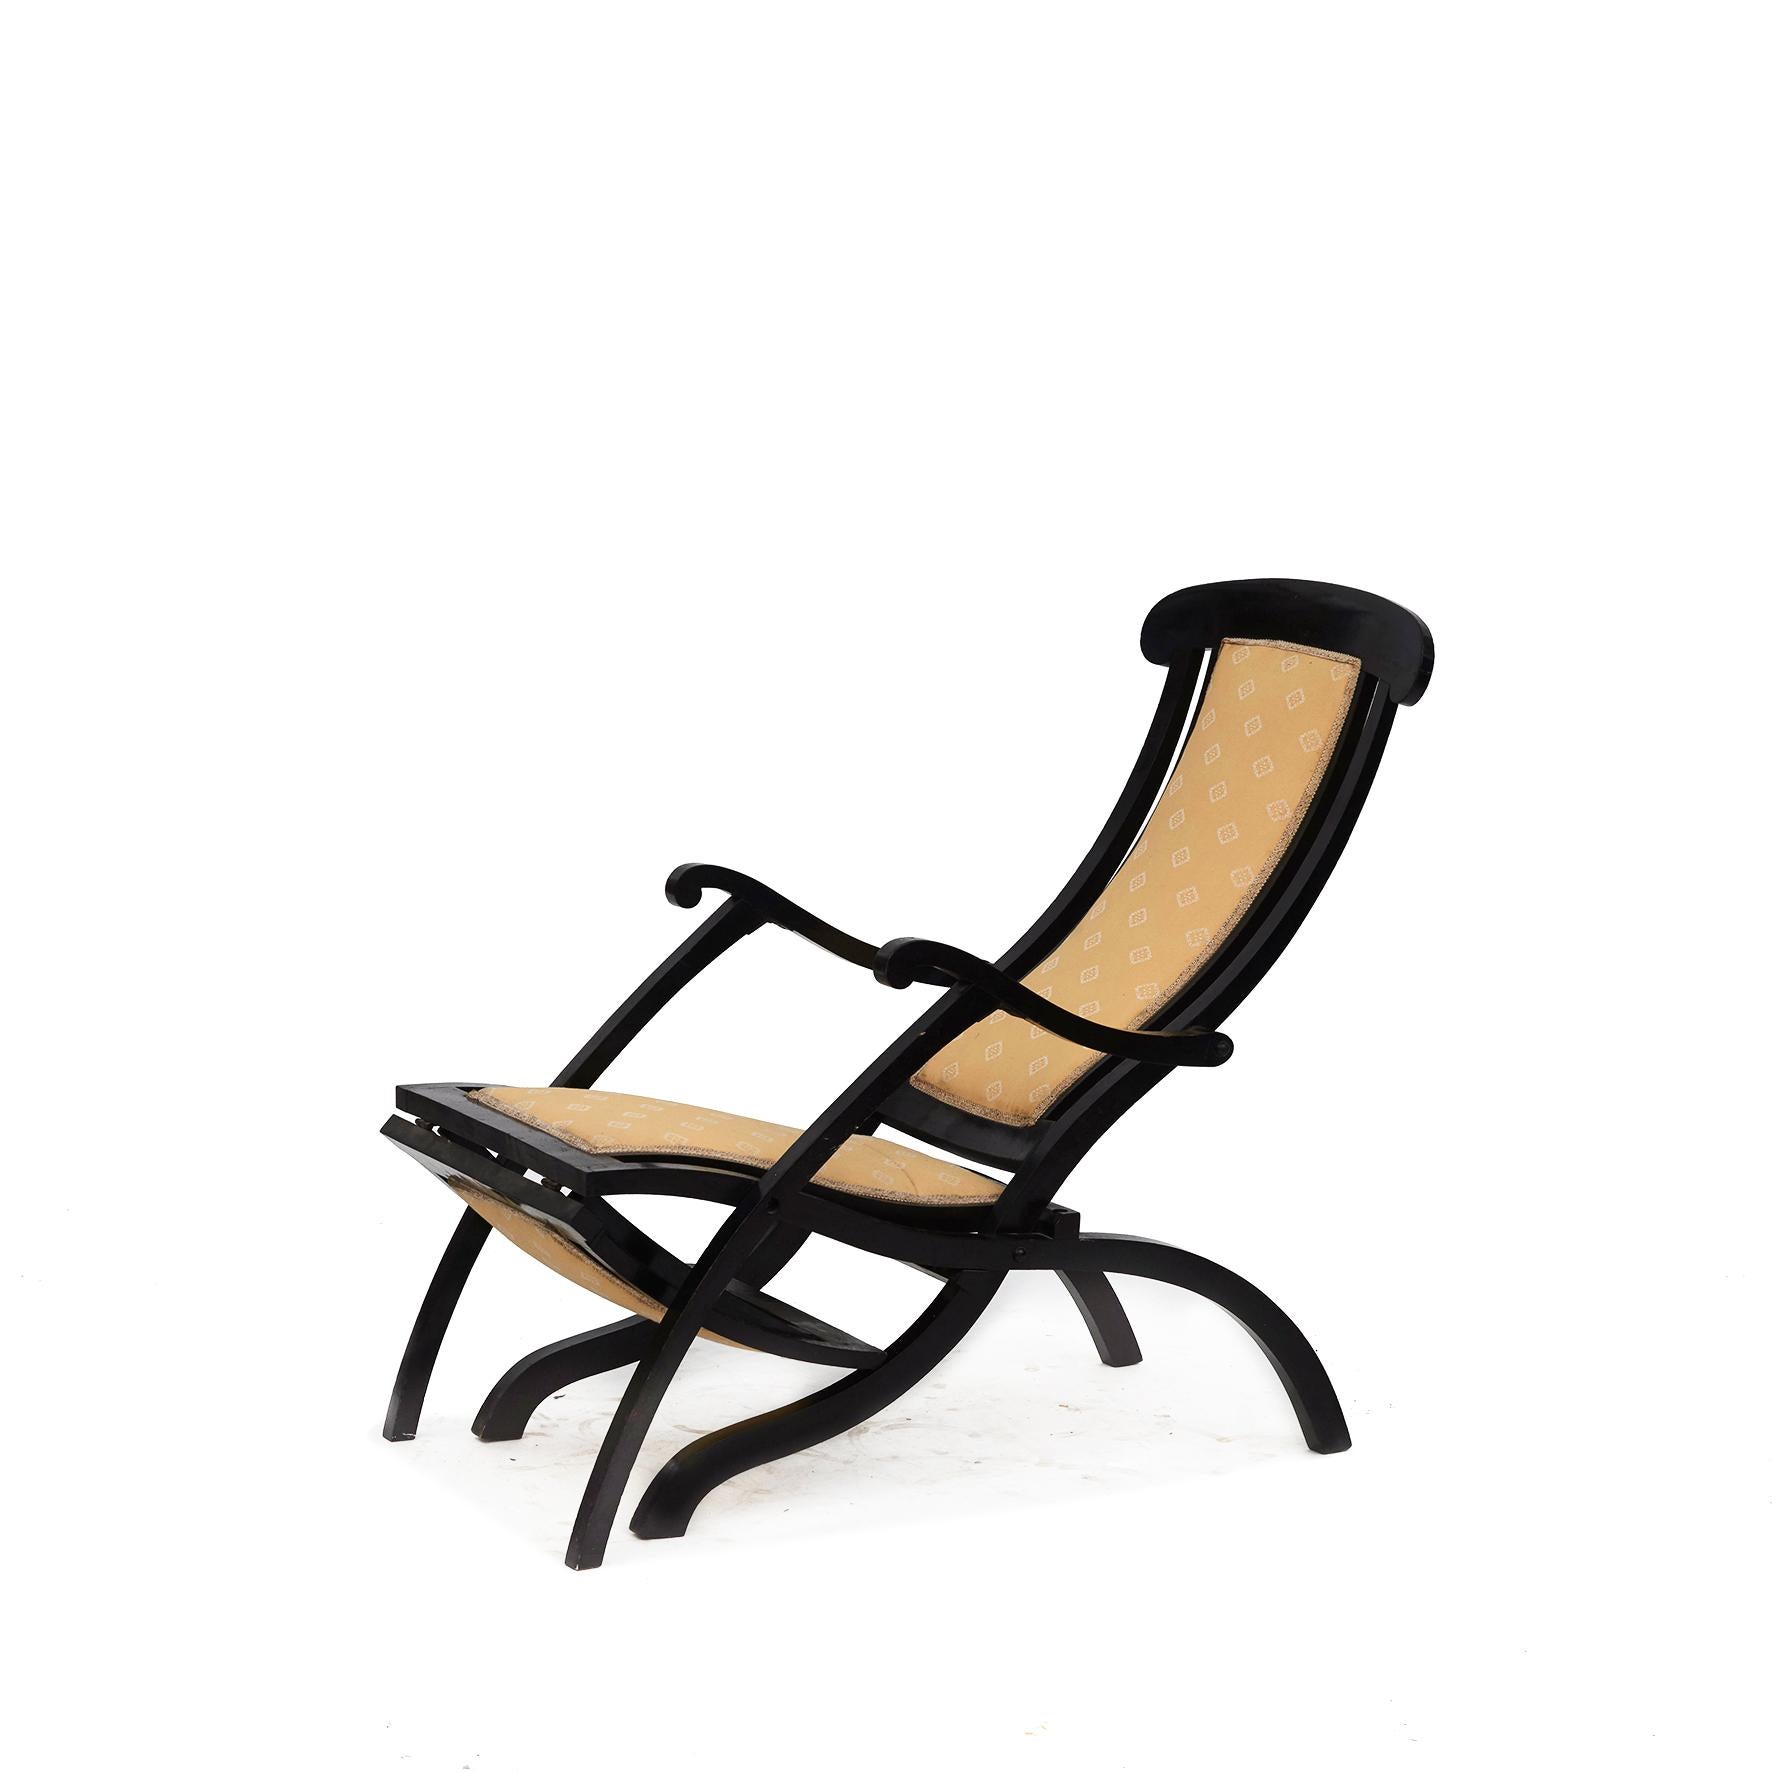 English Steamer folding deck chair with extending footrest.
Frame in black lacqured wood with upholstered seat, back and footrest. Upholstery with age-related wear.

Soft shaped with its scrolling arms and splayed legs